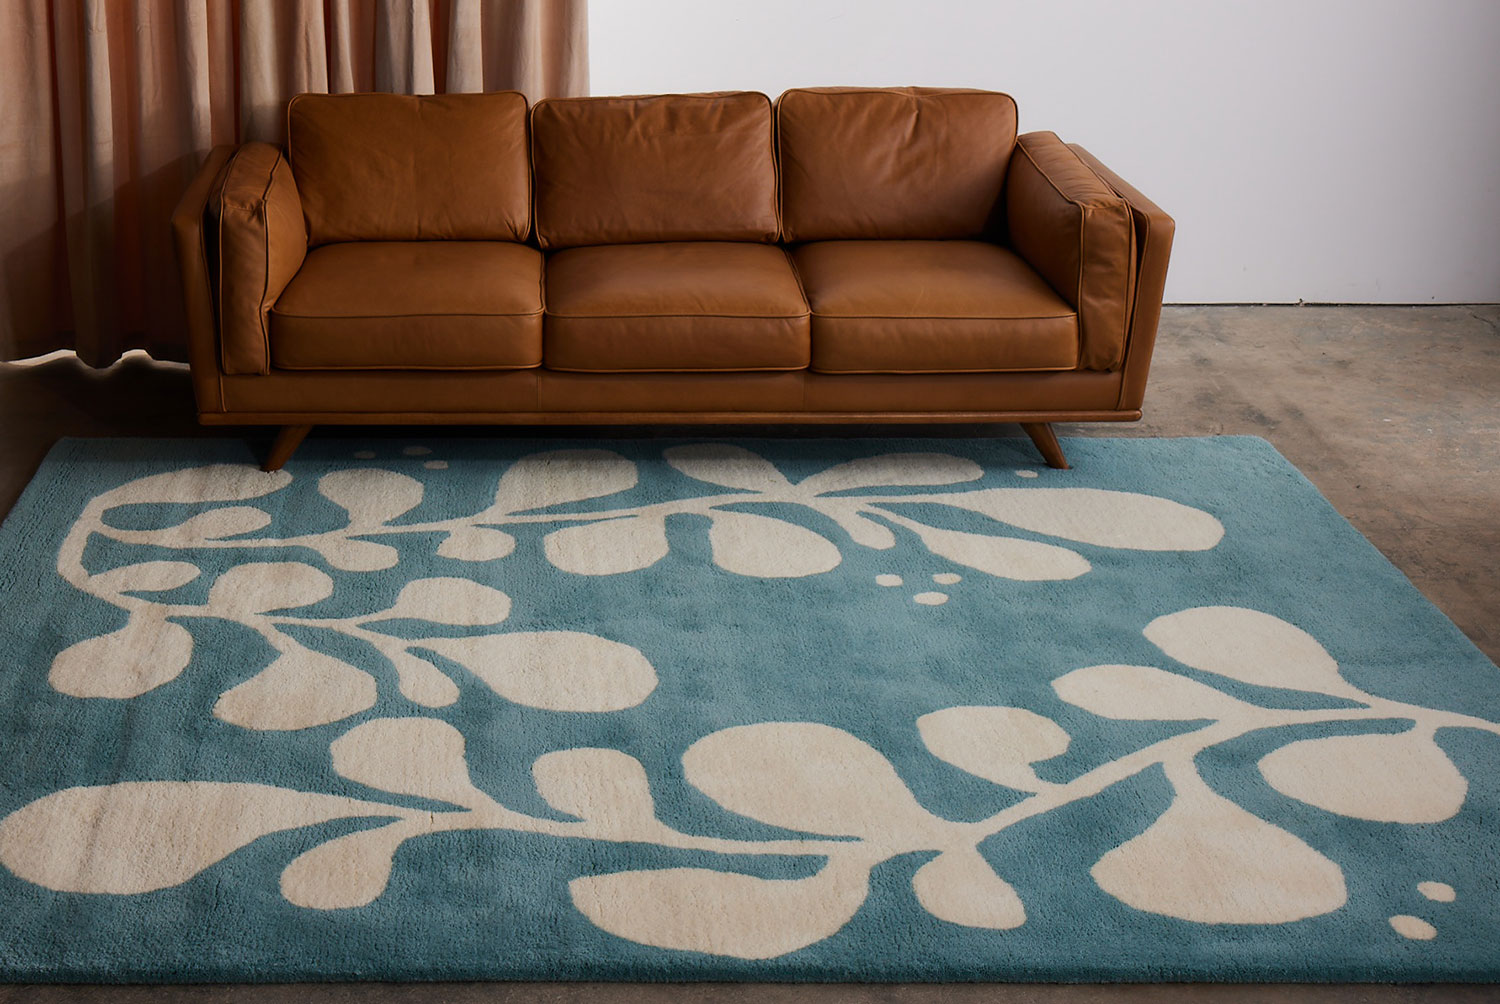 A brown leather chair sits on a neutral and blue area rug with abstract designs on it called Vine Hush